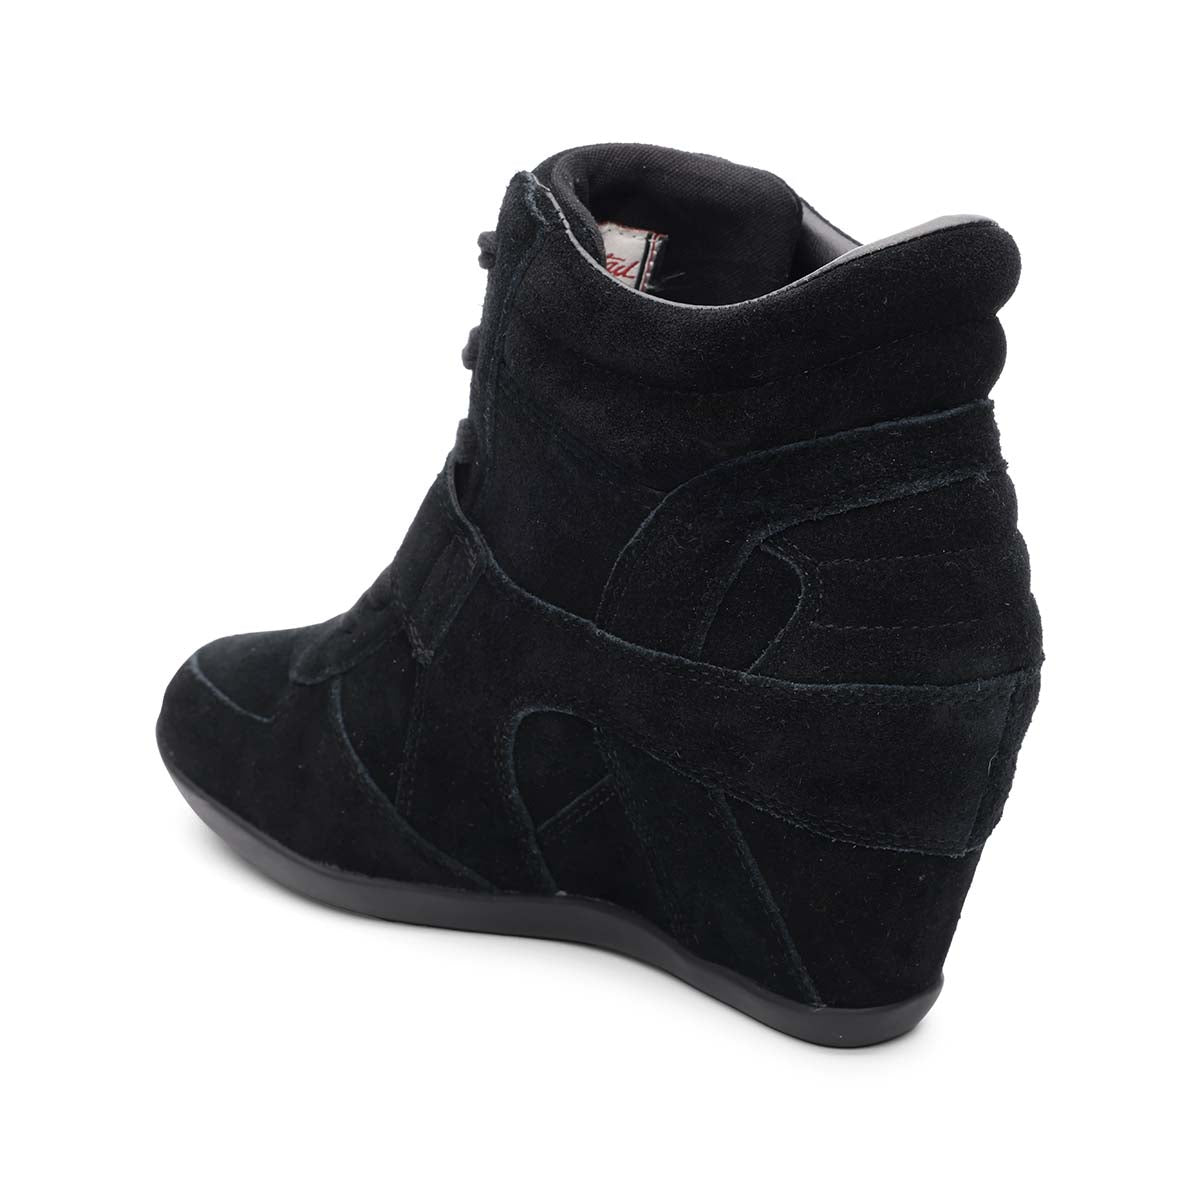 Tommy Hilfiger Wedge Sneaker Boot - Flat ankle boots - Boozt.com